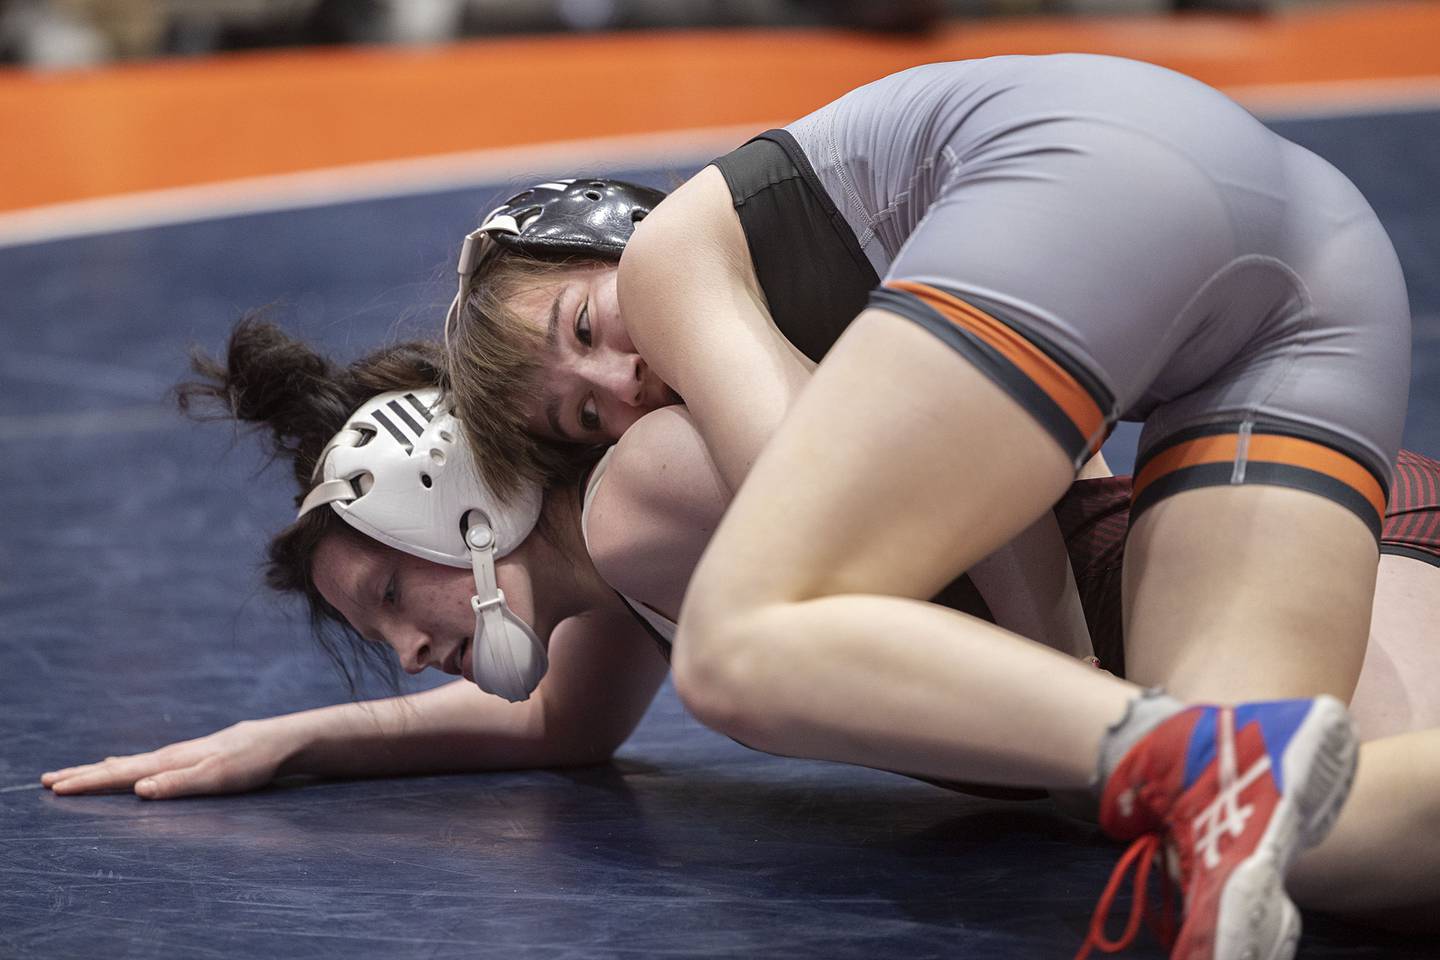 Ashlyn Strenz of Sandwich works on top of Avery Smith of Redbud in the 115-pound third-place match at the IHSA Girls Wrestling State Finals on Saturday, Feb. 25, 2023, in Bloomington.